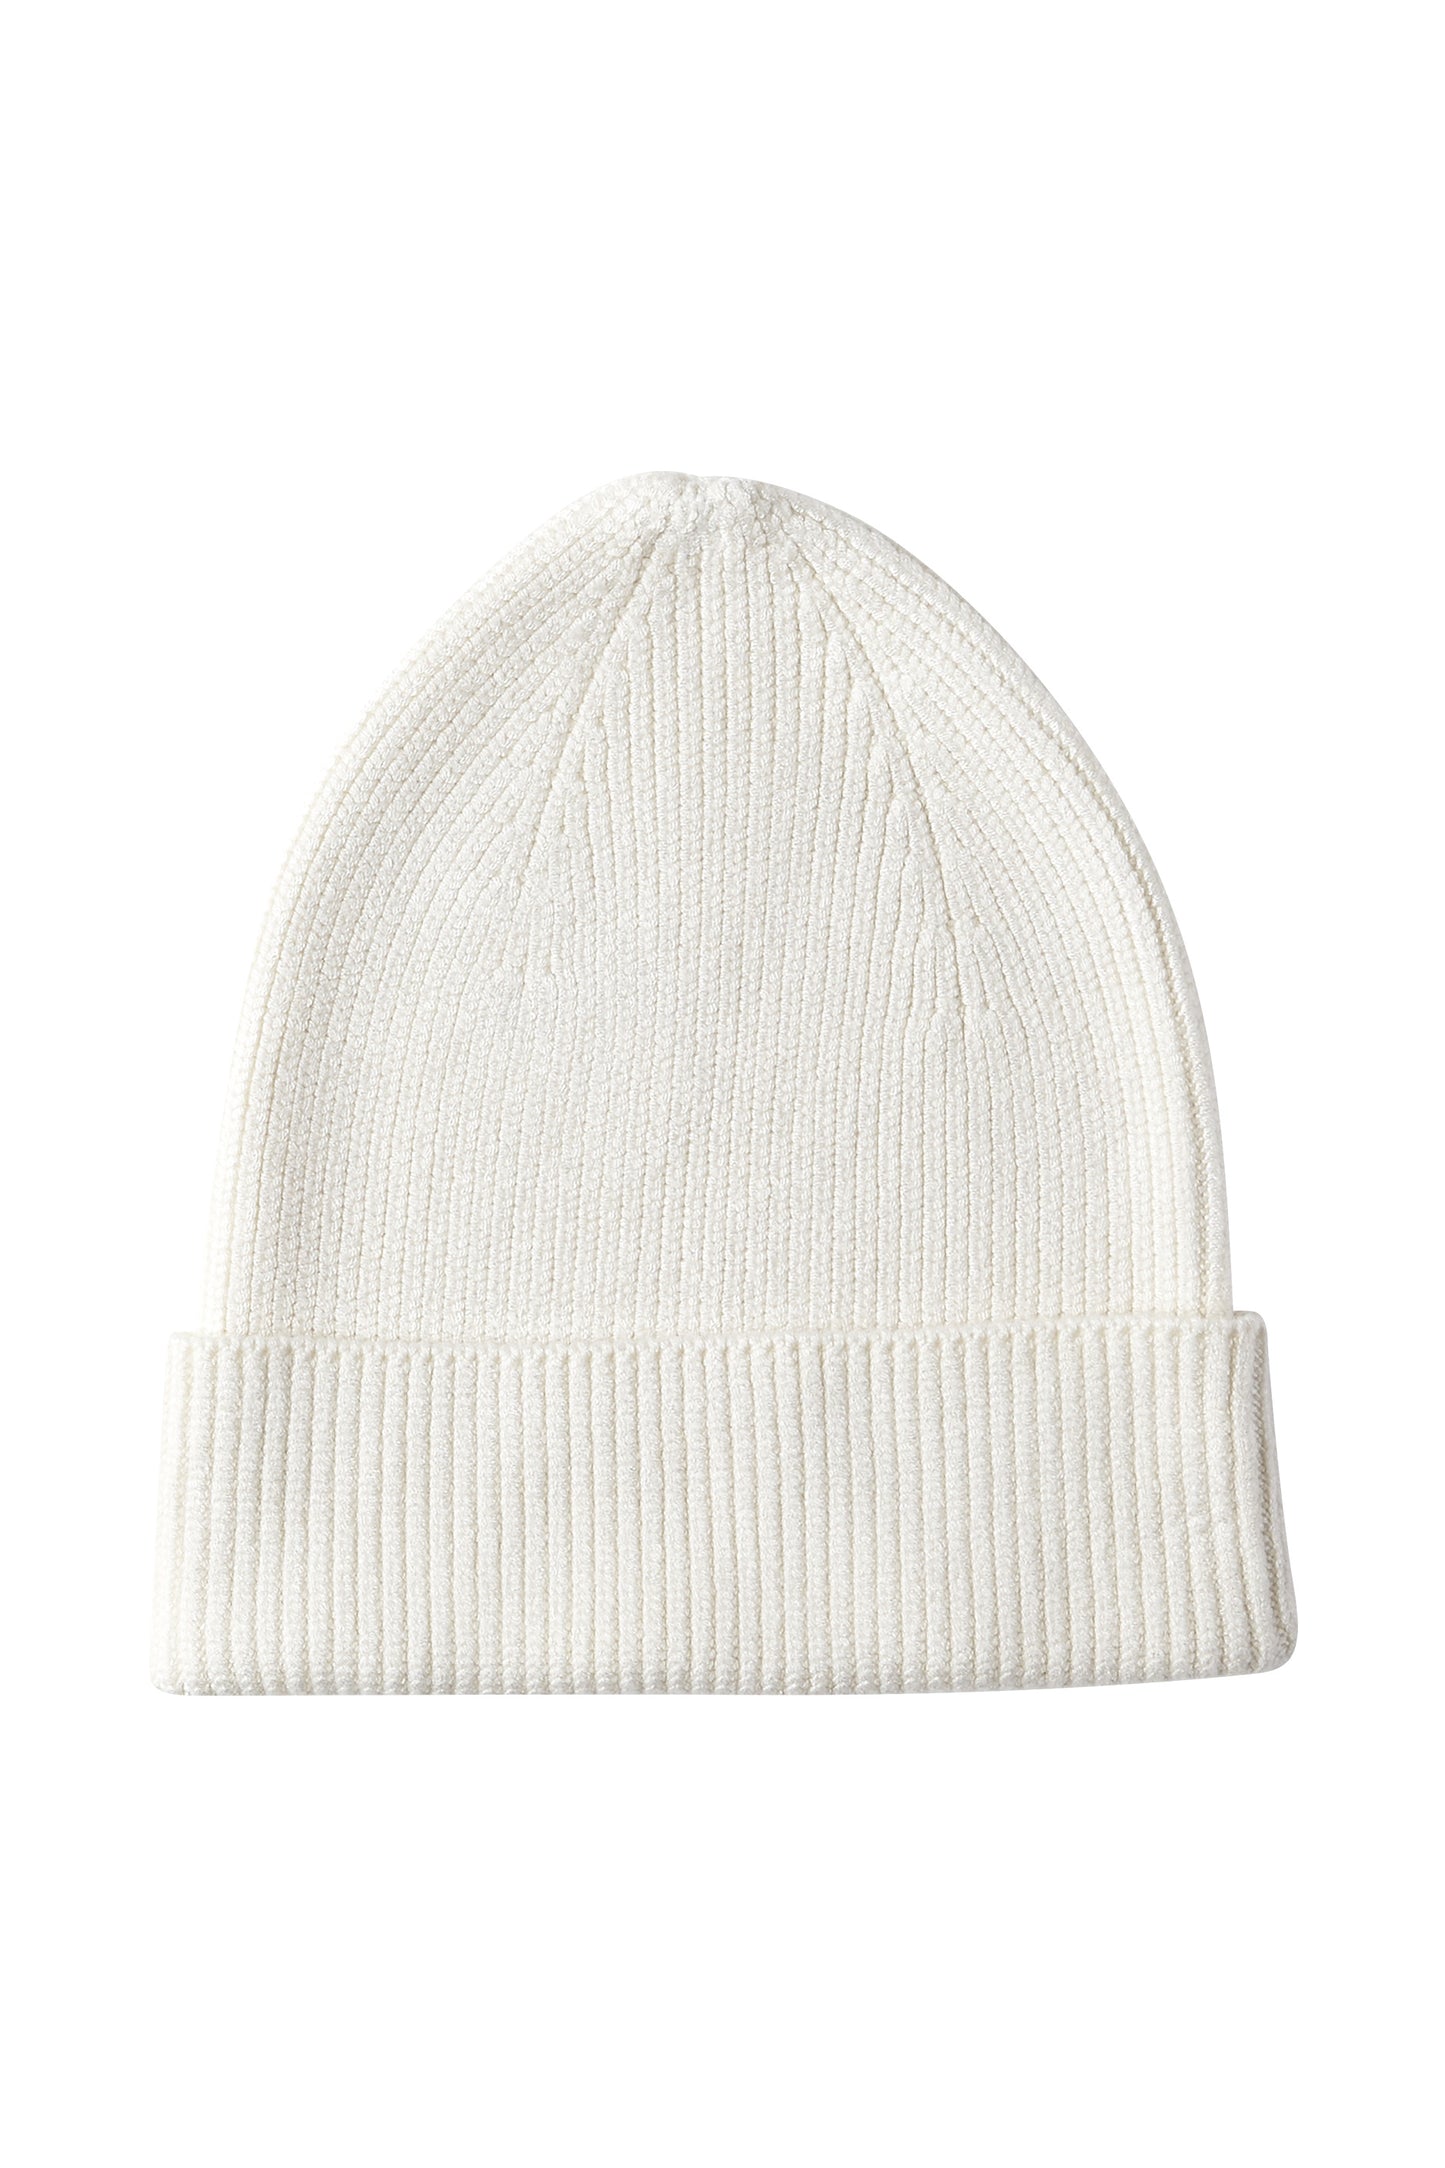 BOODY - Ribbed Knit Beanie Pipo